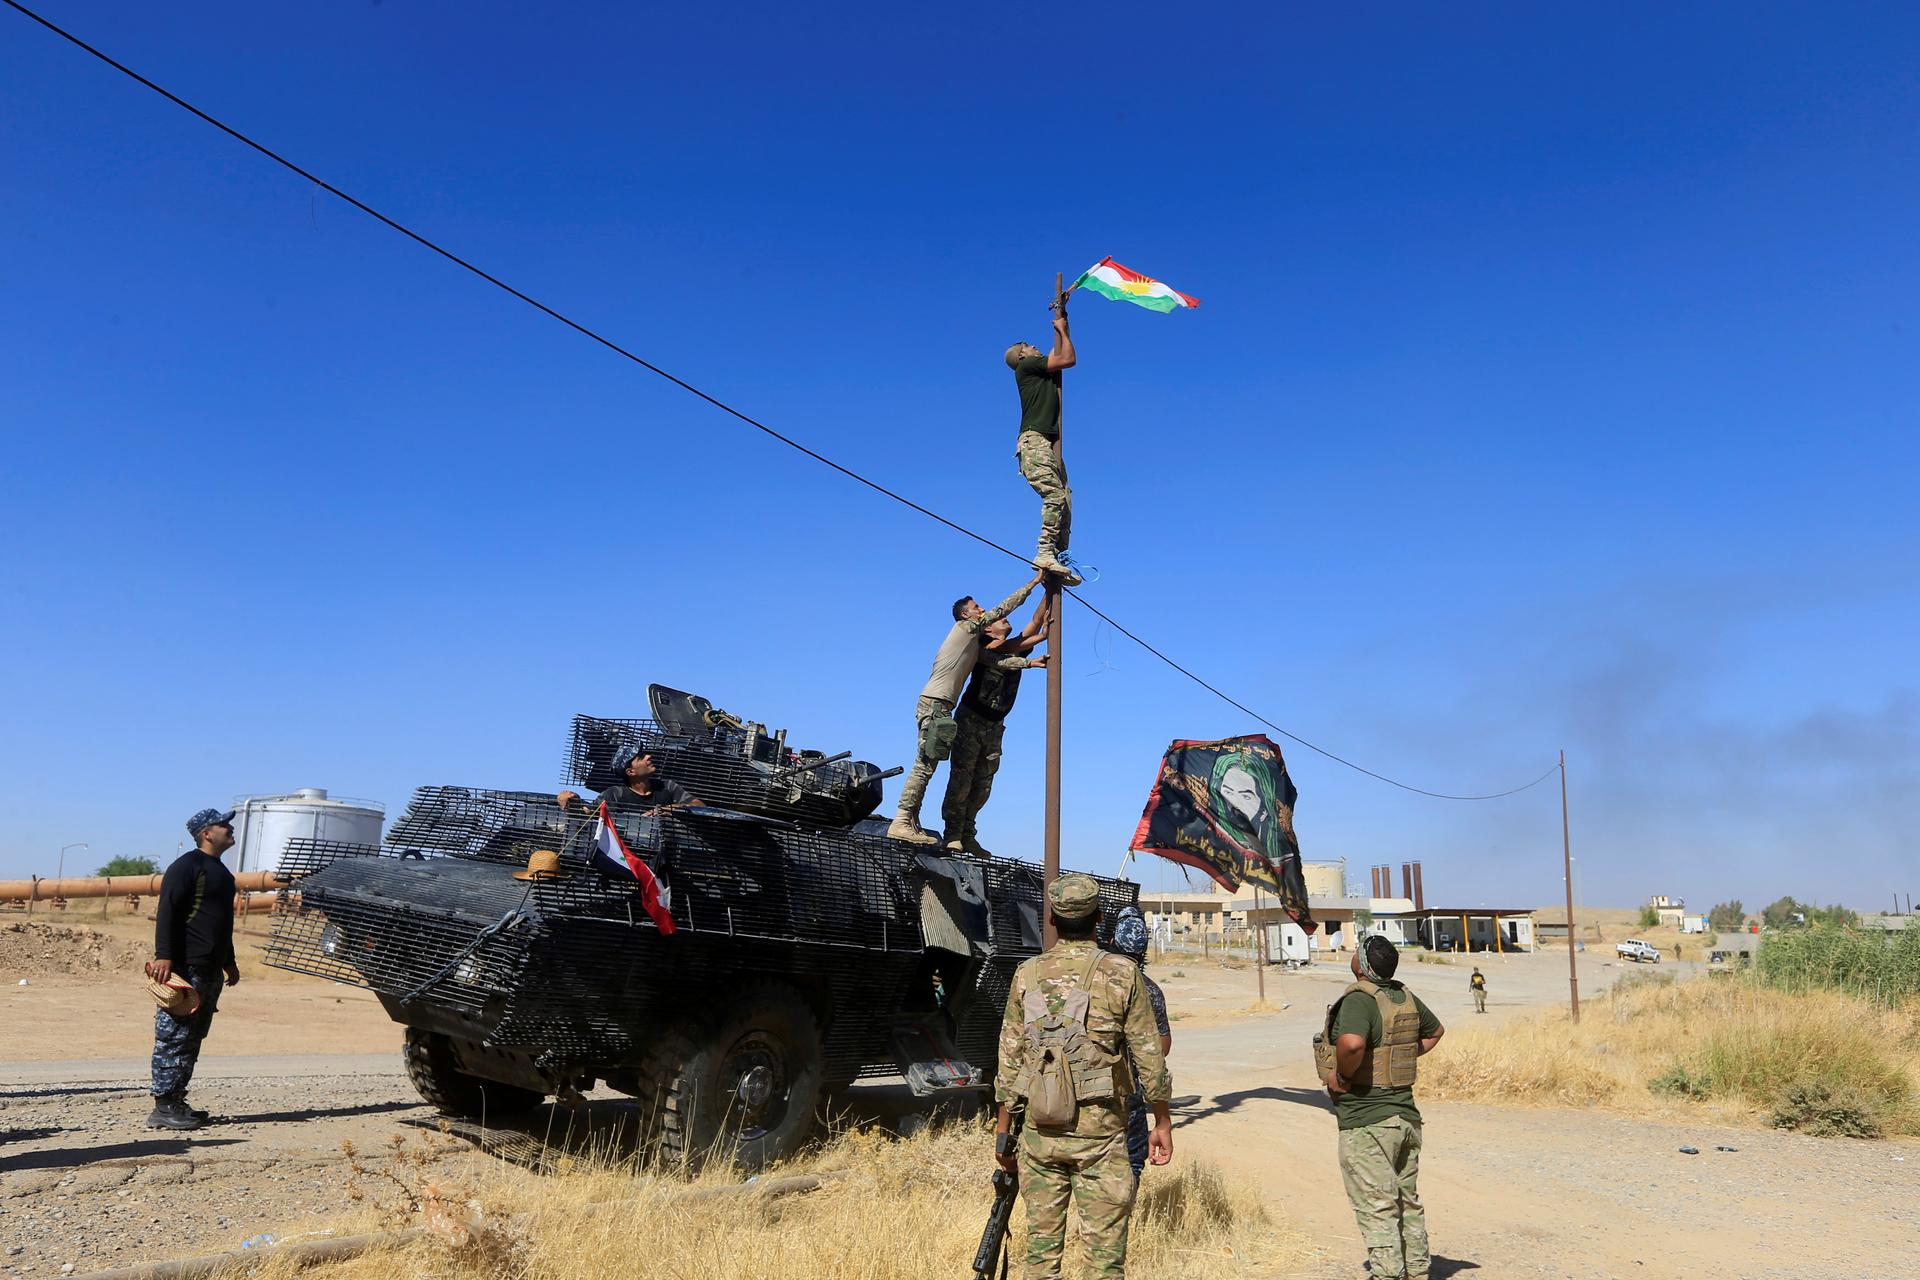 A member of Iraqi security forces takes down a Kurdish flag in Dibis on the outskirts of Kirkuk, Iraq, Oct. 17, 2017.